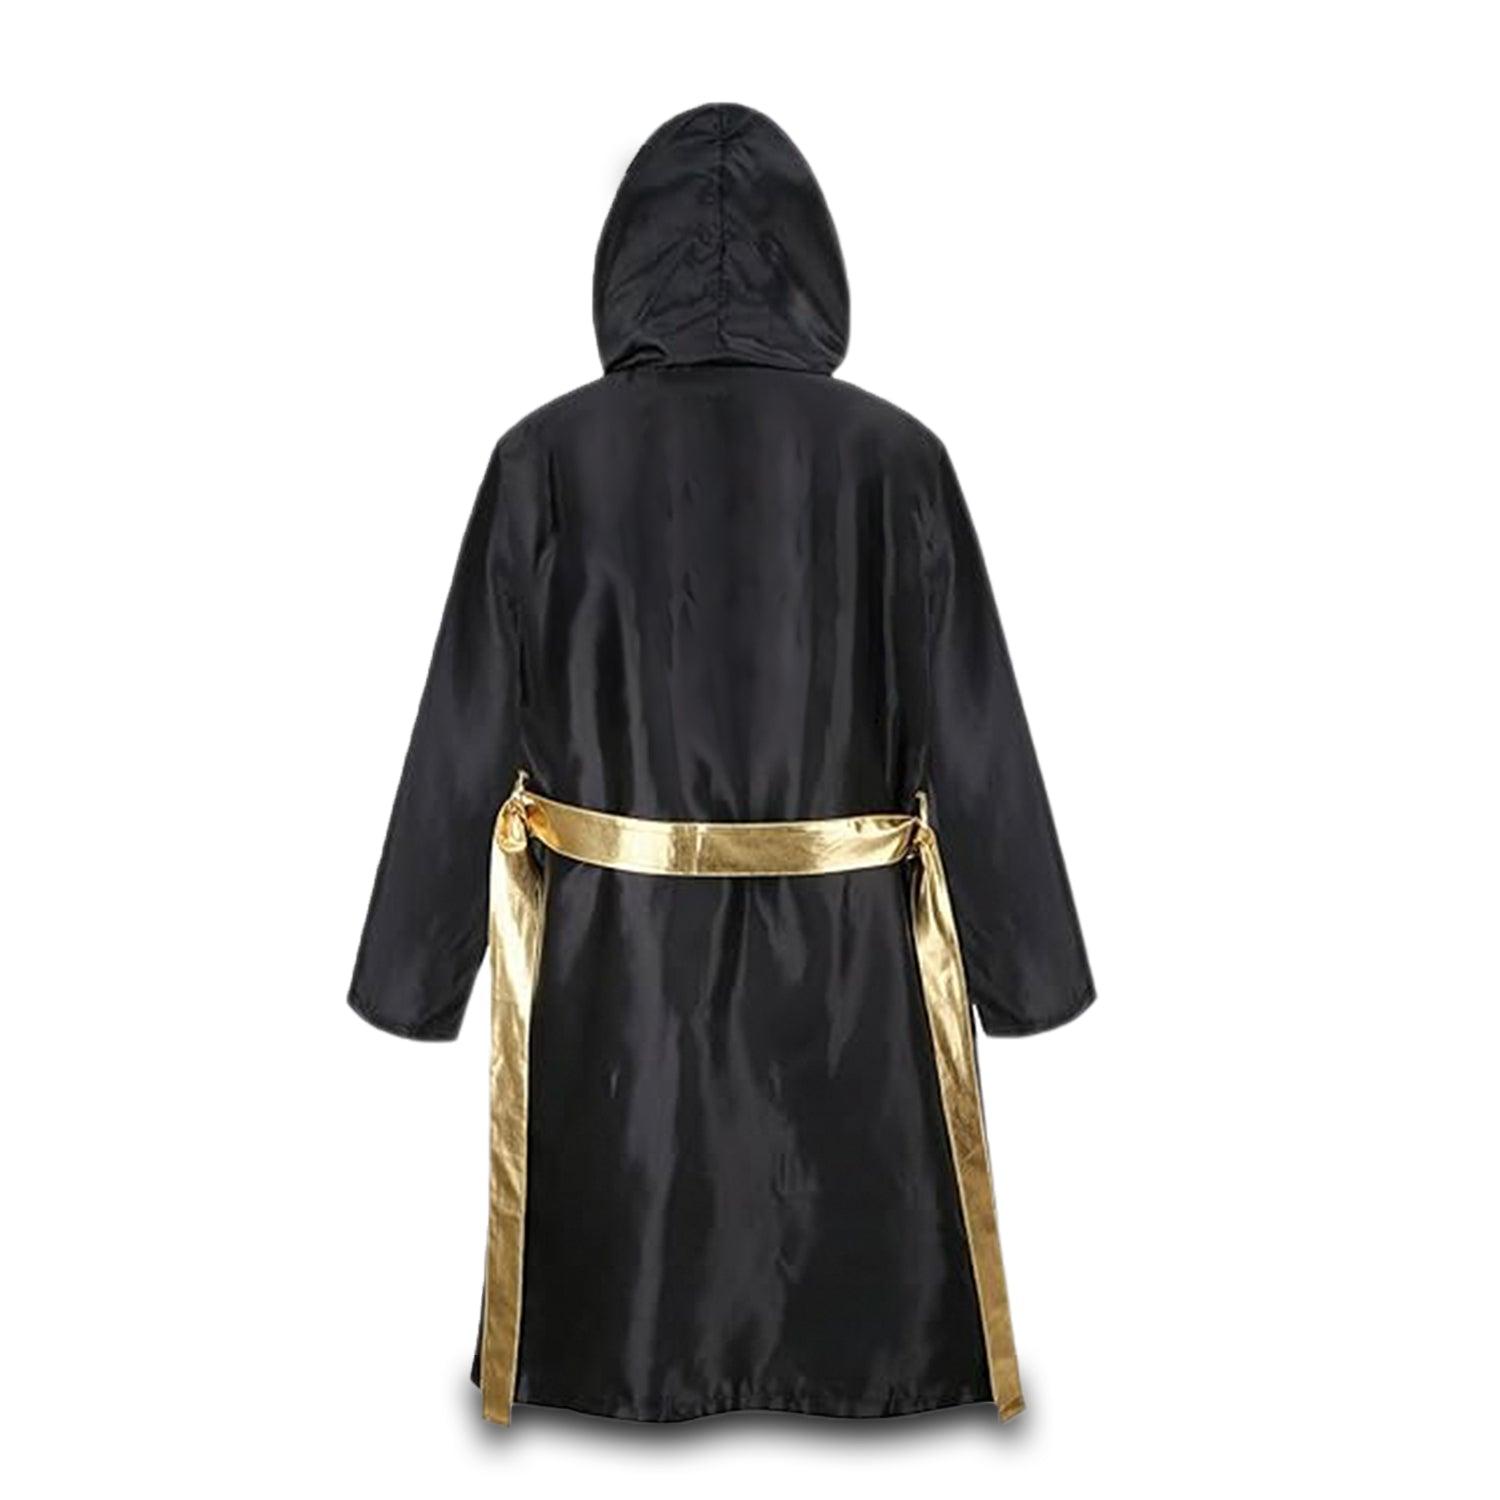 RingMaster Sports Champion Series Boxing Fight Robe Black & Gold Gown Image 4